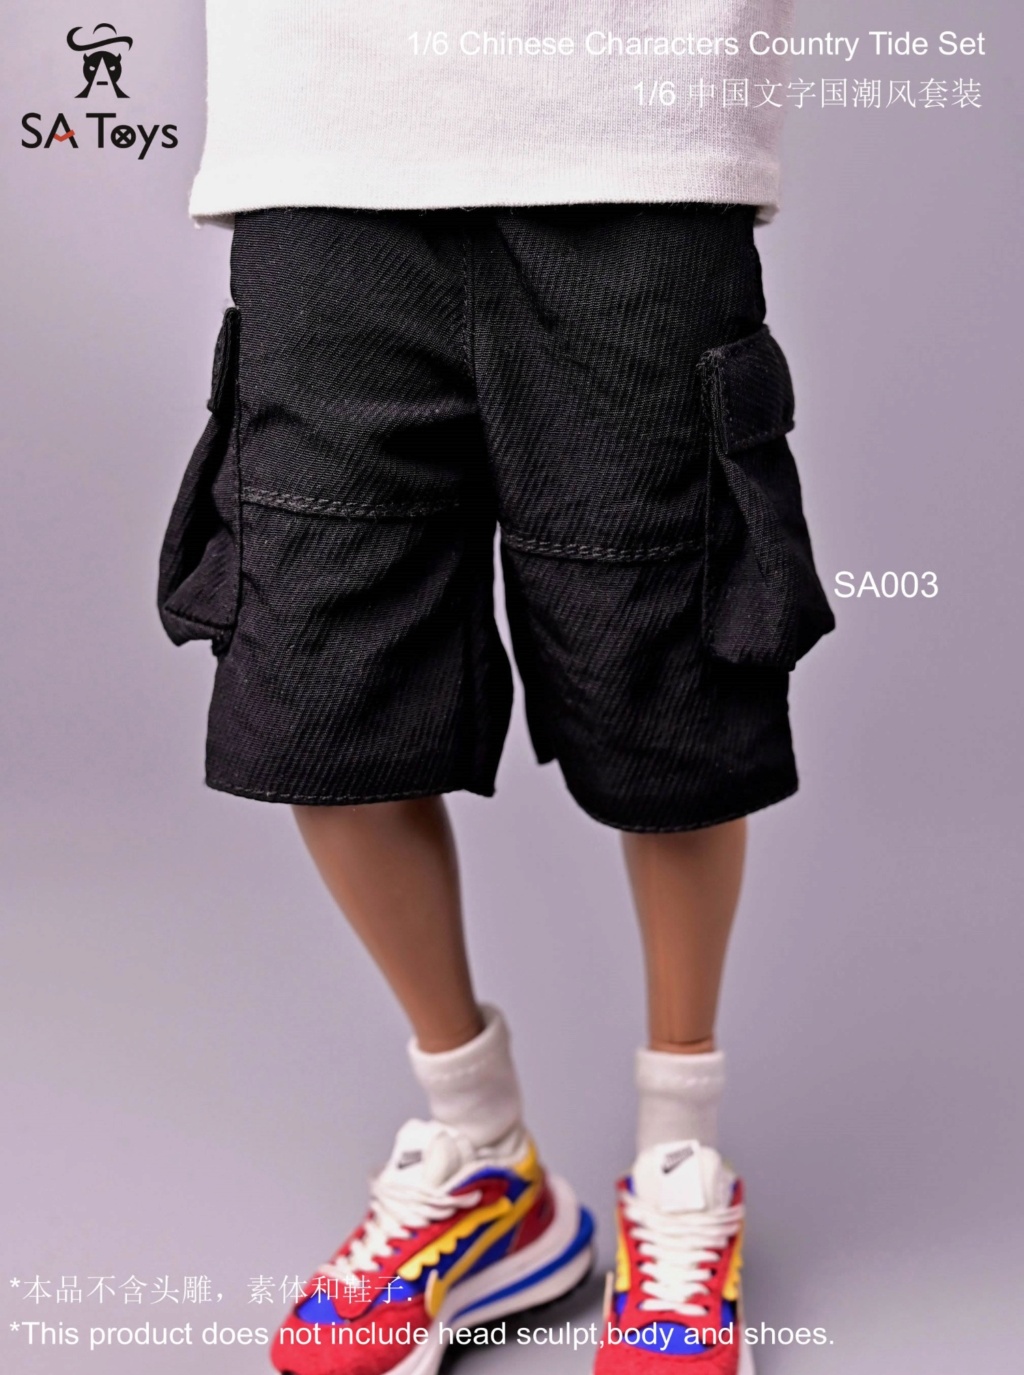 NEW PRODUCT: SA Toys：1/6 Multi color Chinese style men's clothing 11075811